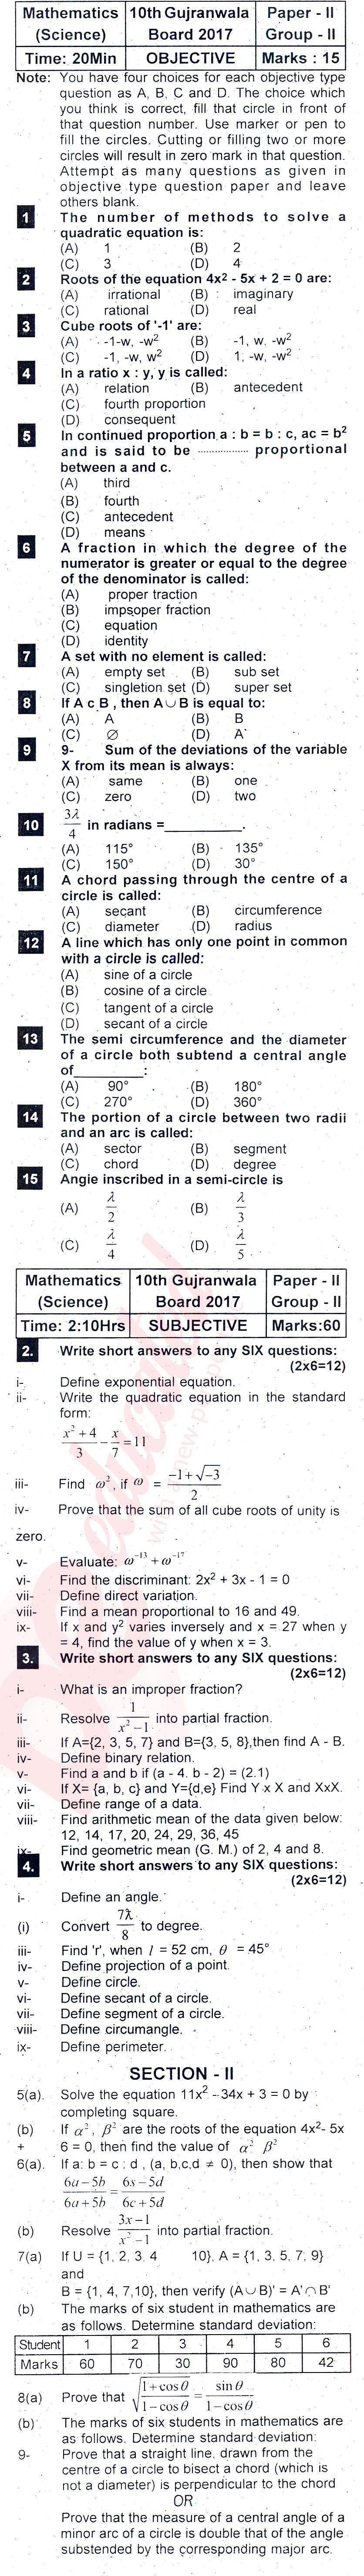 Math 10th class Past Paper Group 2 BISE Gujranwala 2017